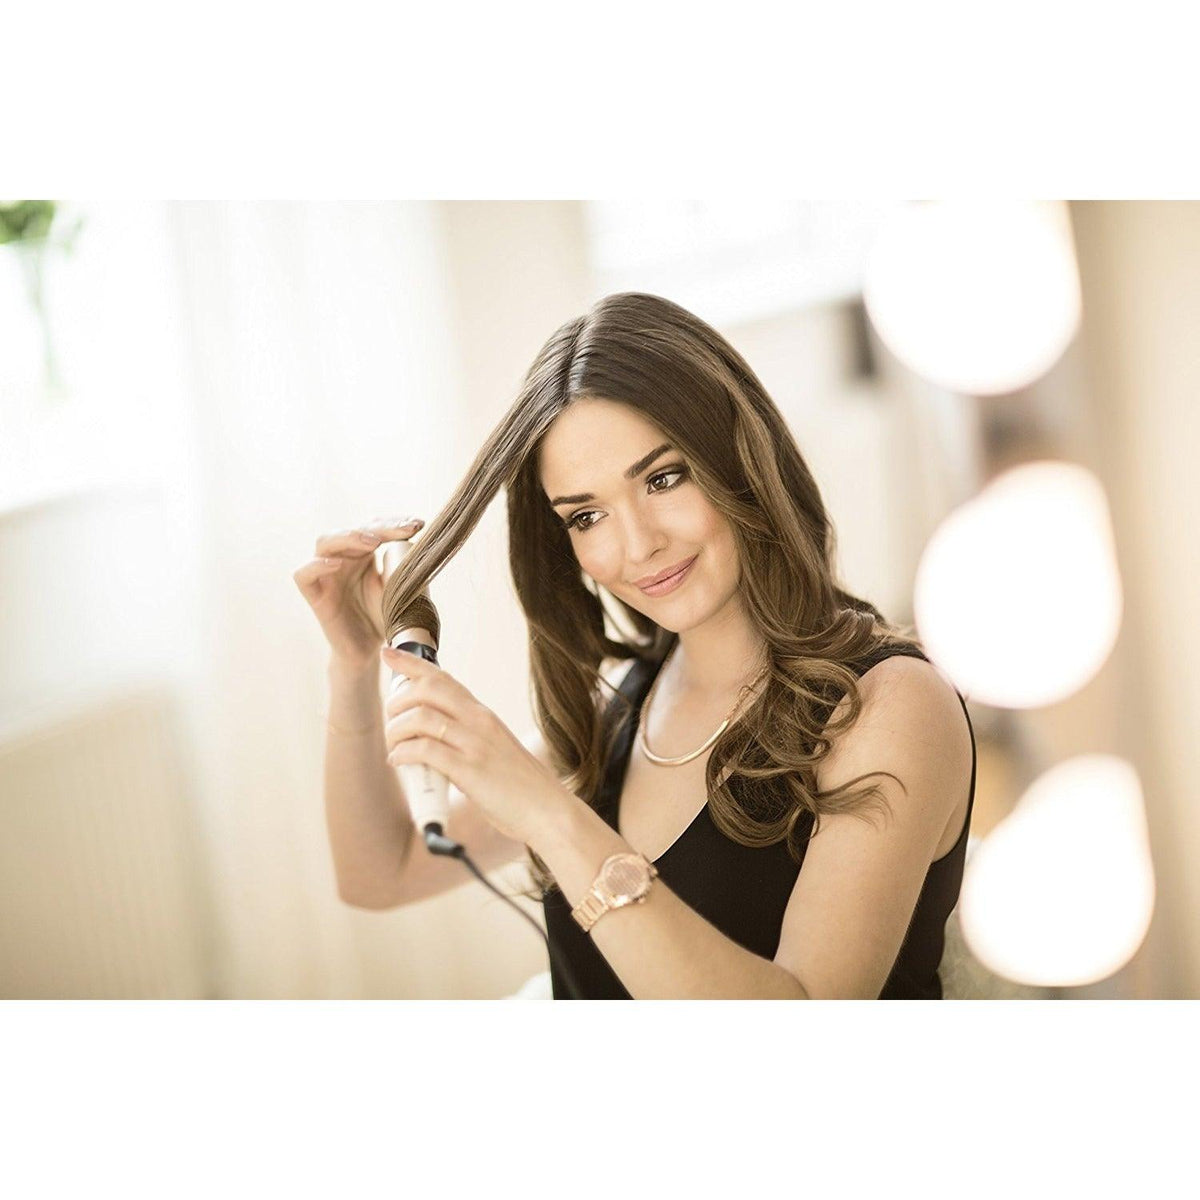 Remington Proluxe 32mm Hair Curling Tong -Rose Gold | CI9132 from DID Electrical - guaranteed Irish, guaranteed quality service. (6890770006204)